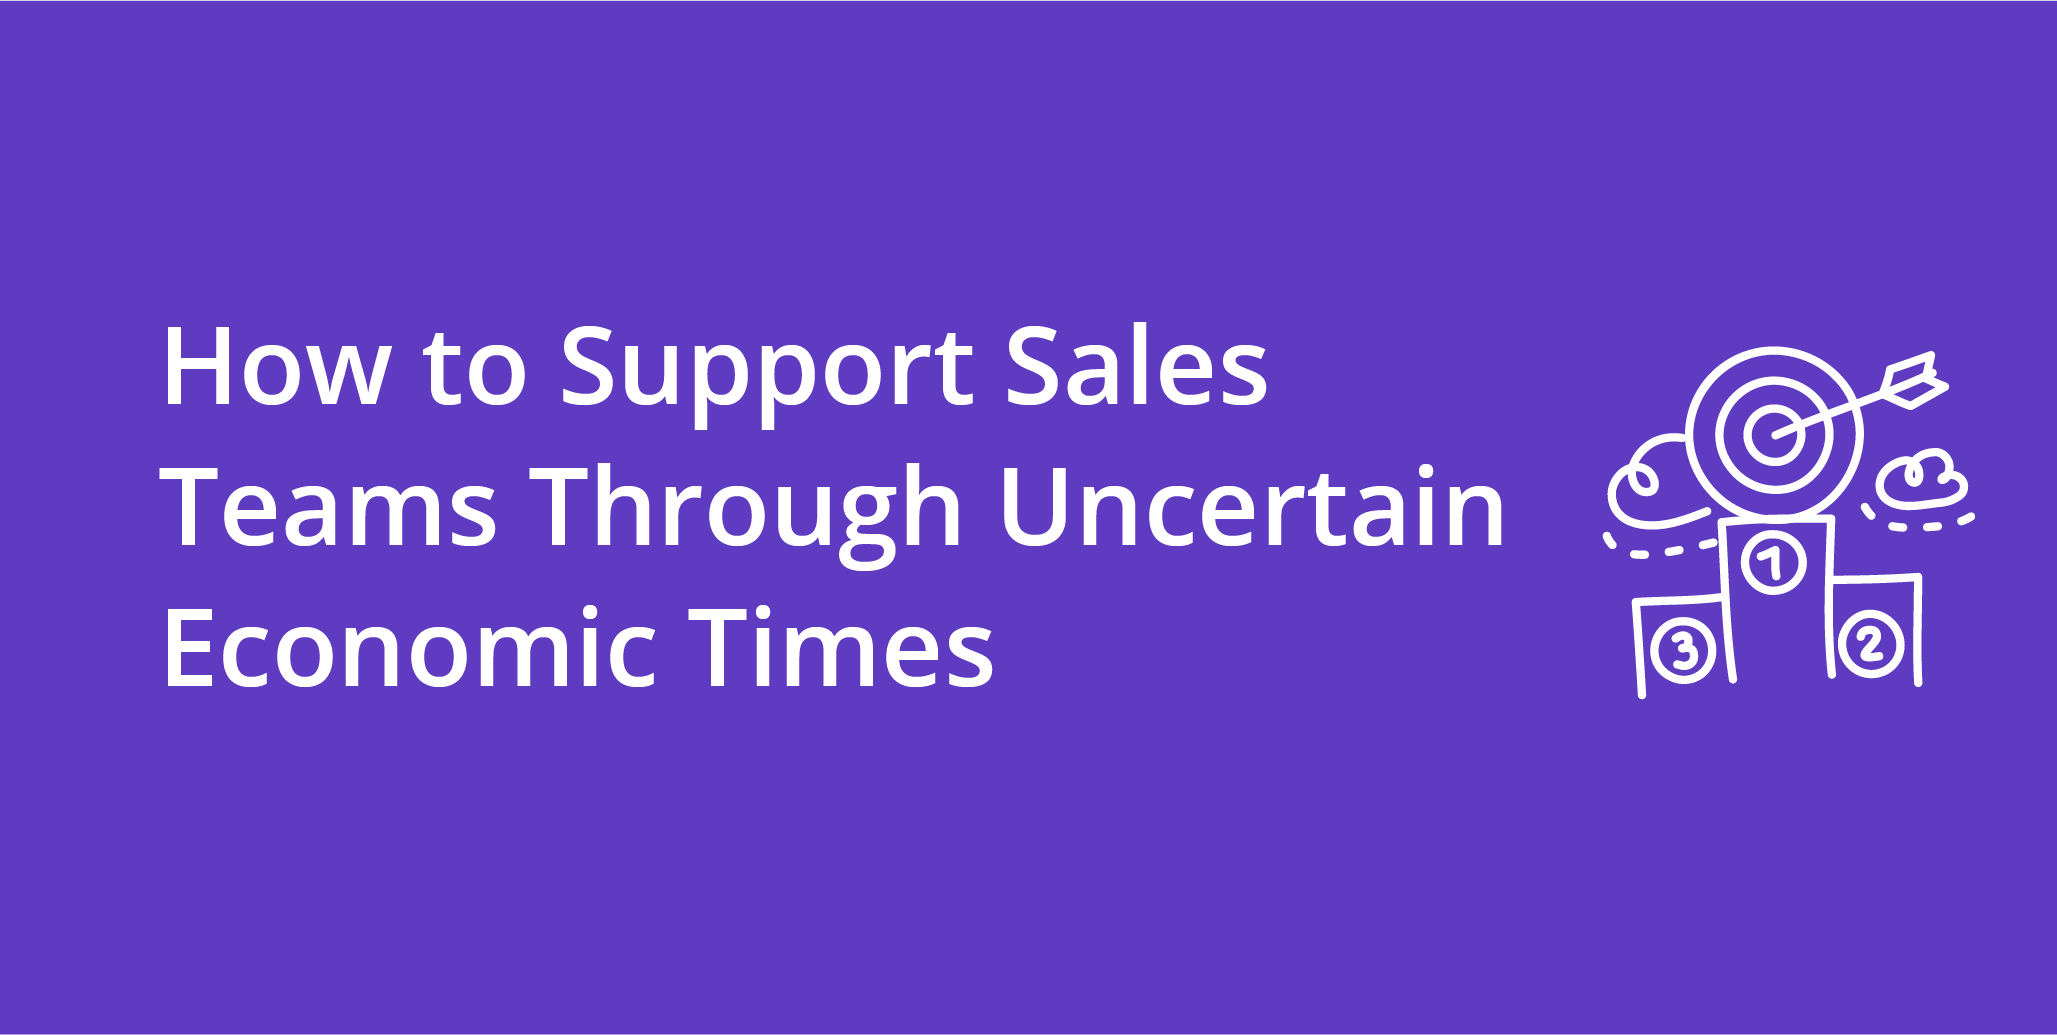 How to Support Sales Teams Through Uncertain Economic Times